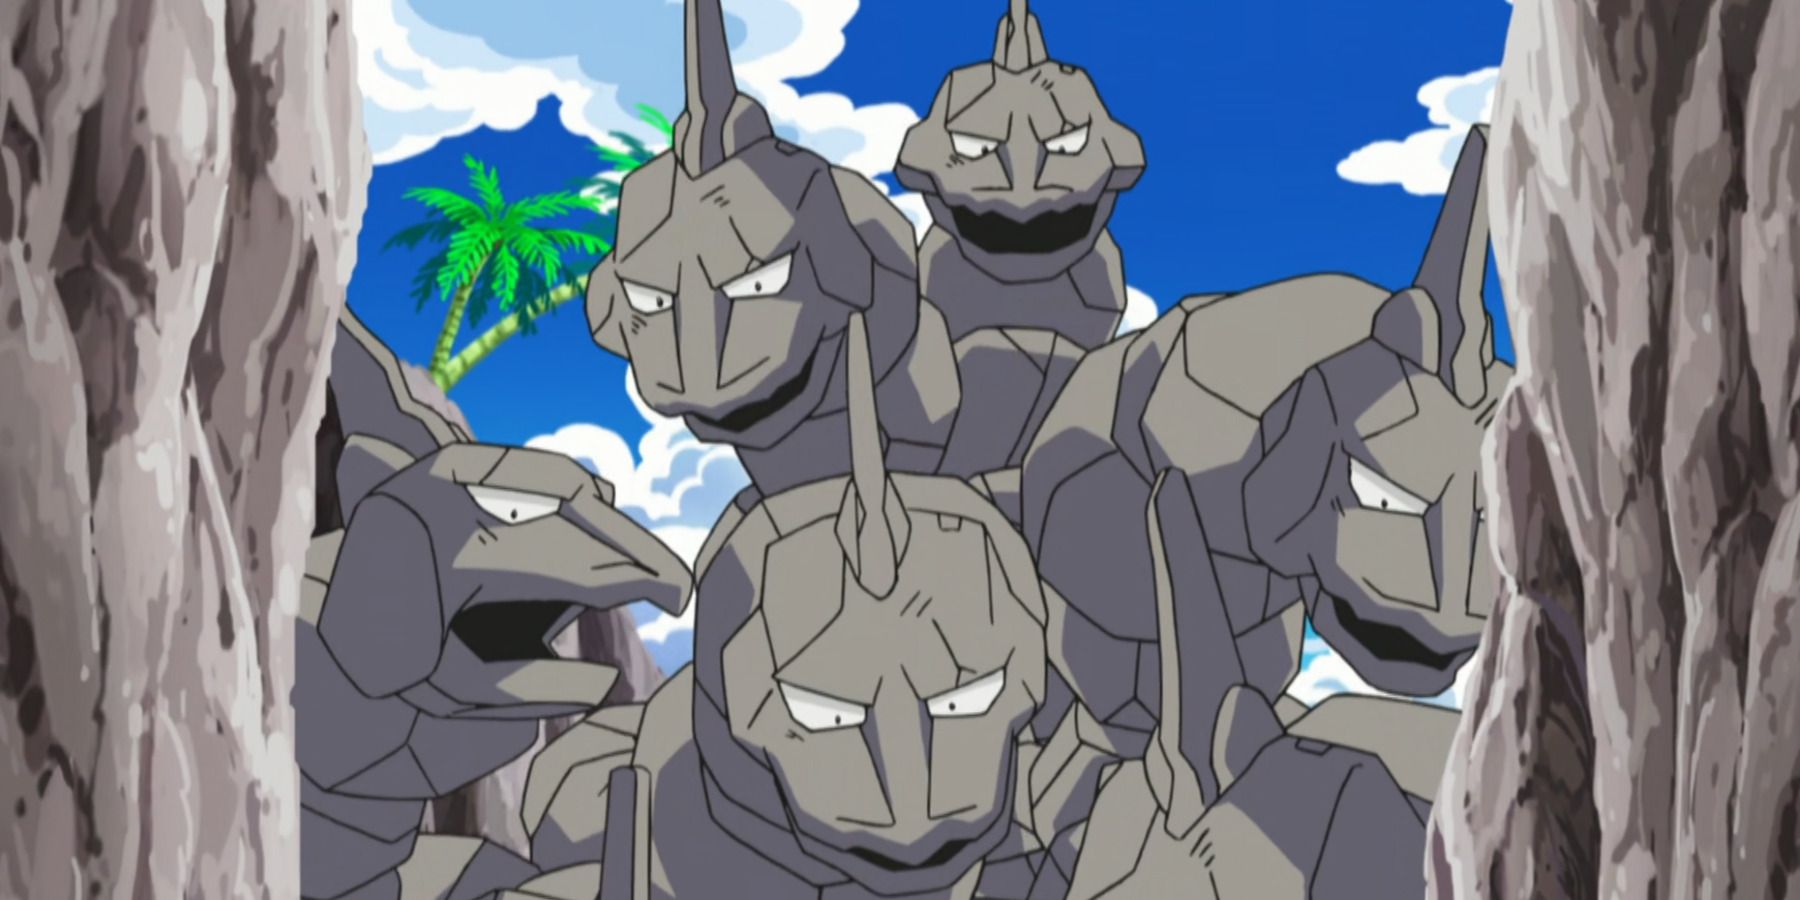 Several Onix looking into a crevice in the Pokemon anime